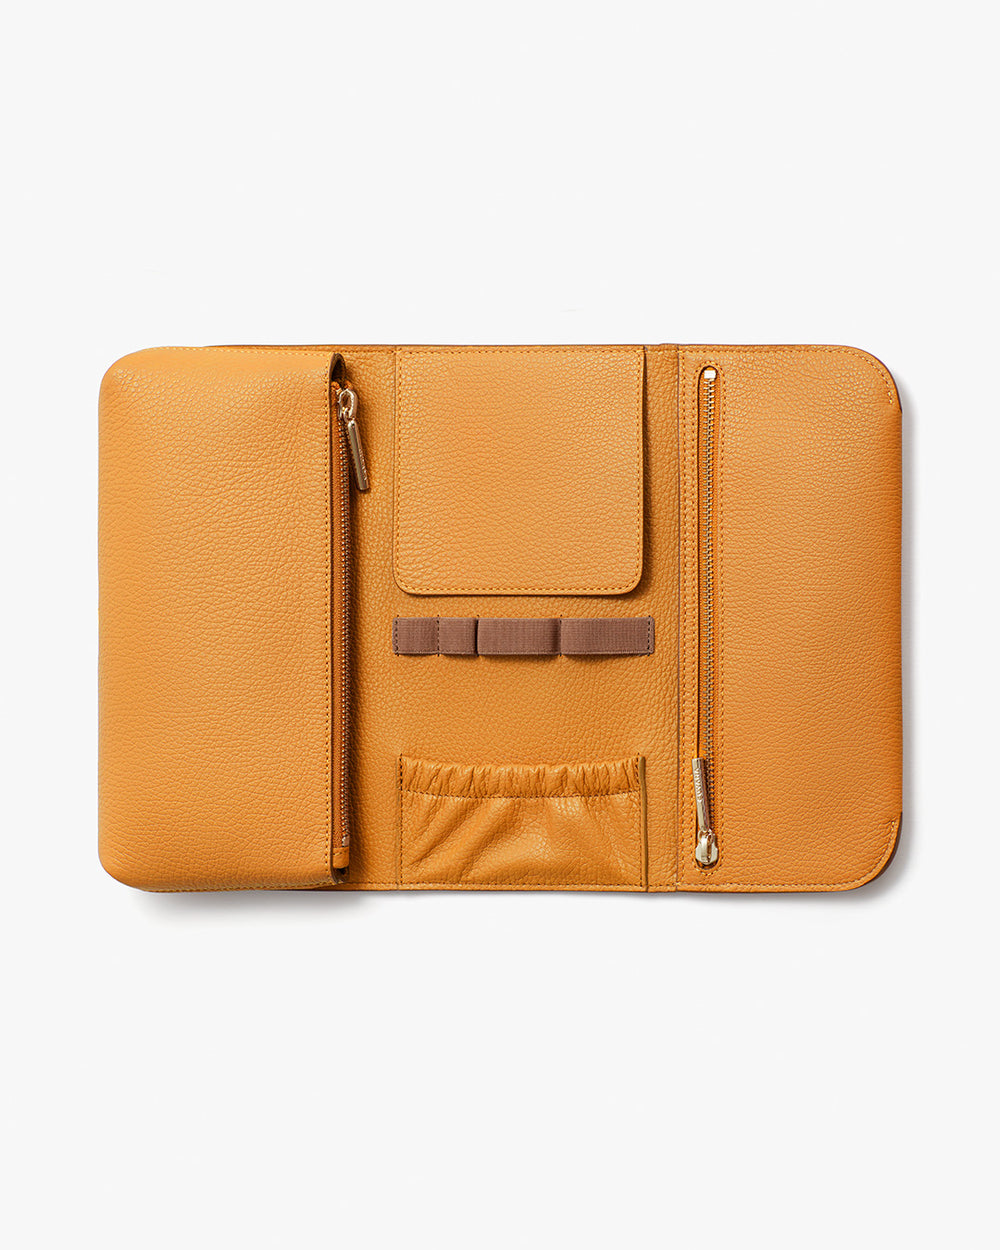 Organizer with pockets, elastic slots, zippered compartments, and pouches